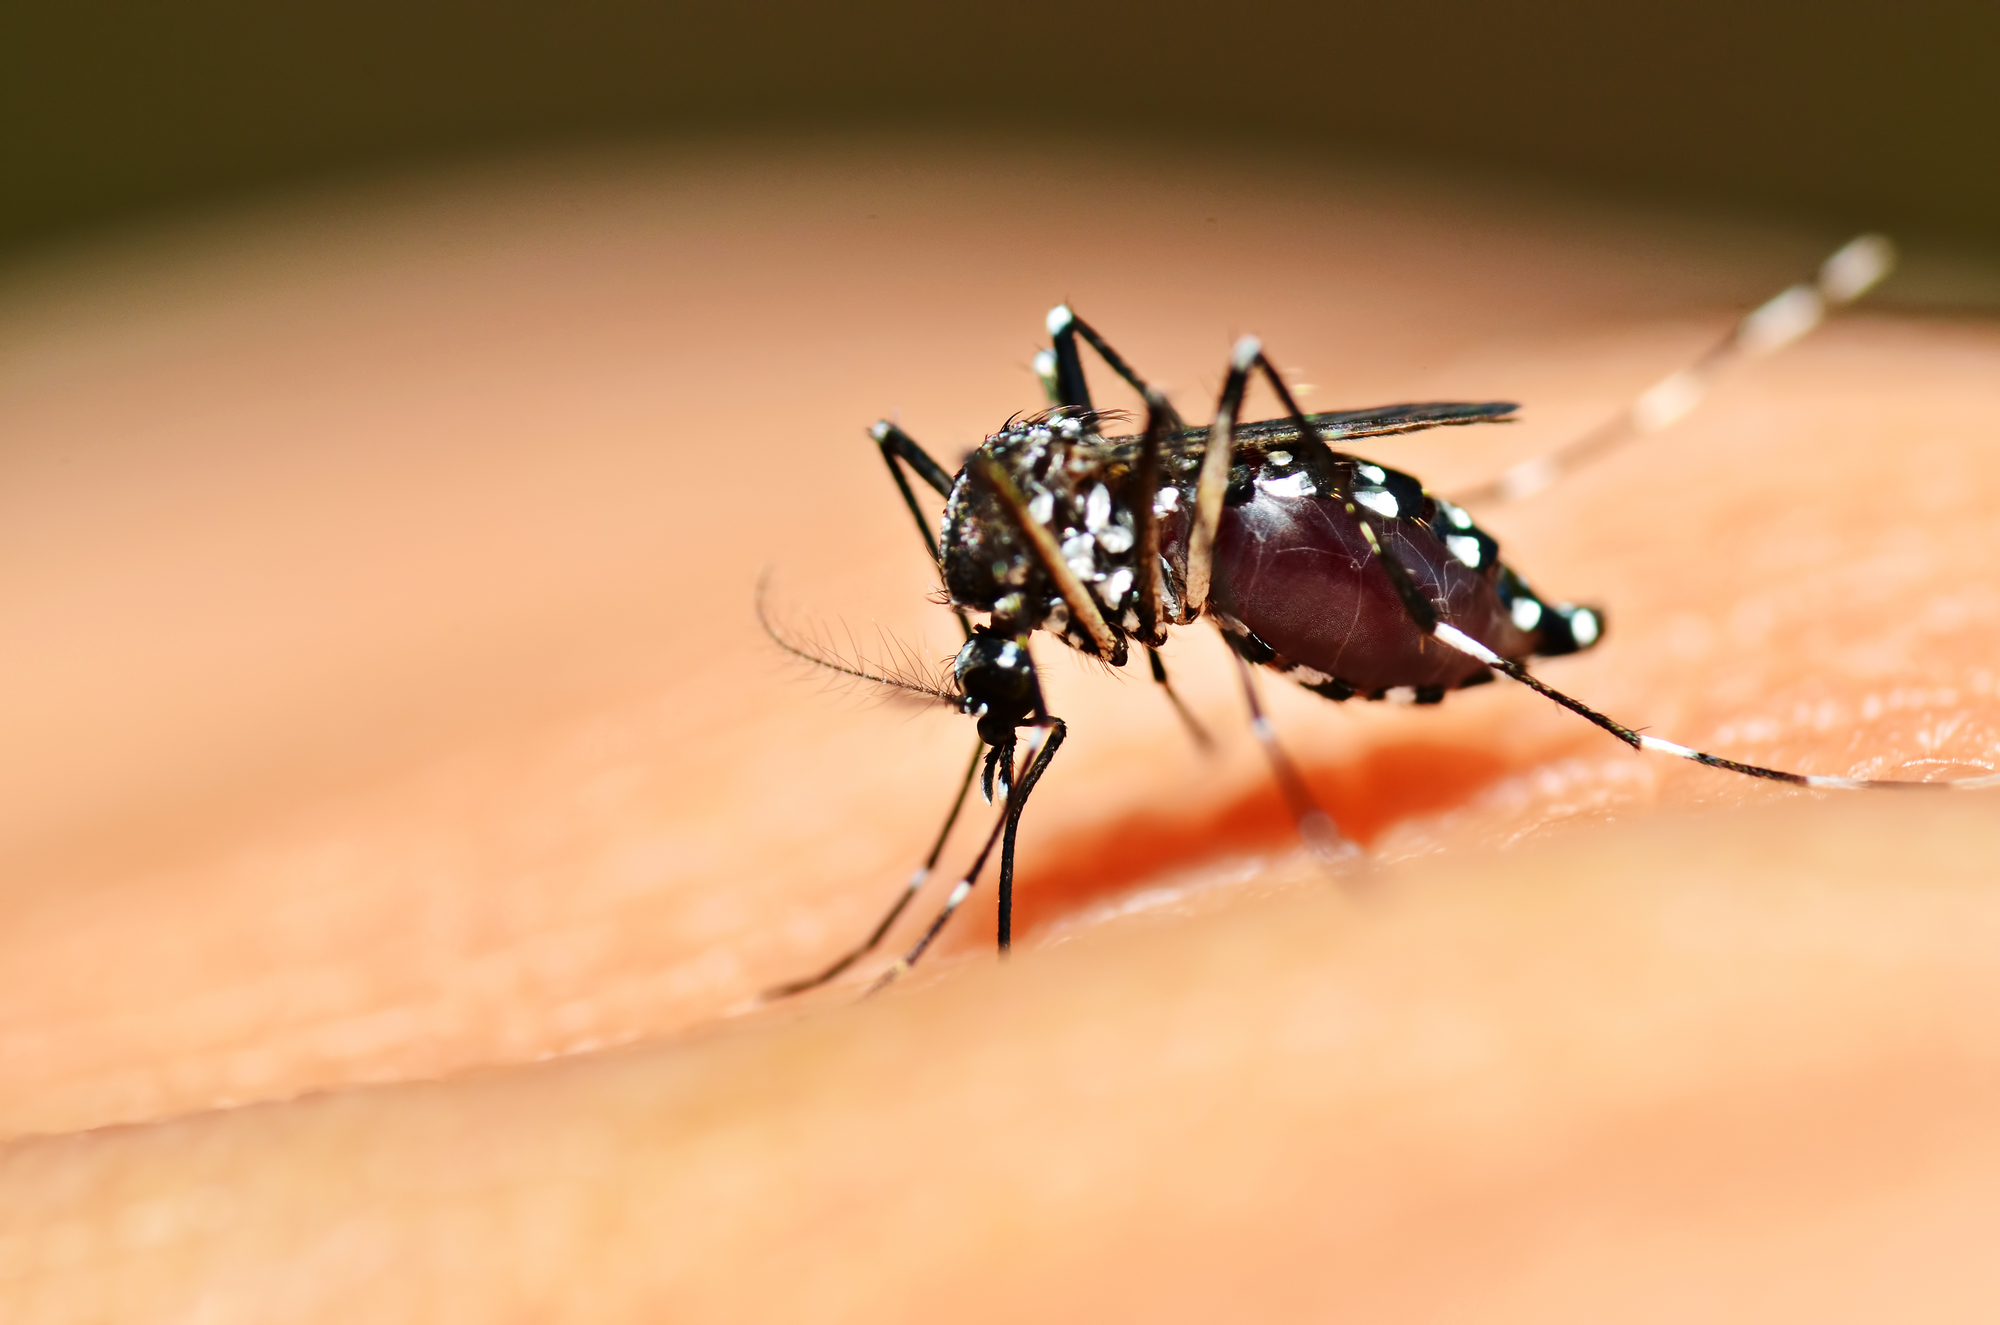 Dengue fever cases have surged in the Americas this year, says international health agency